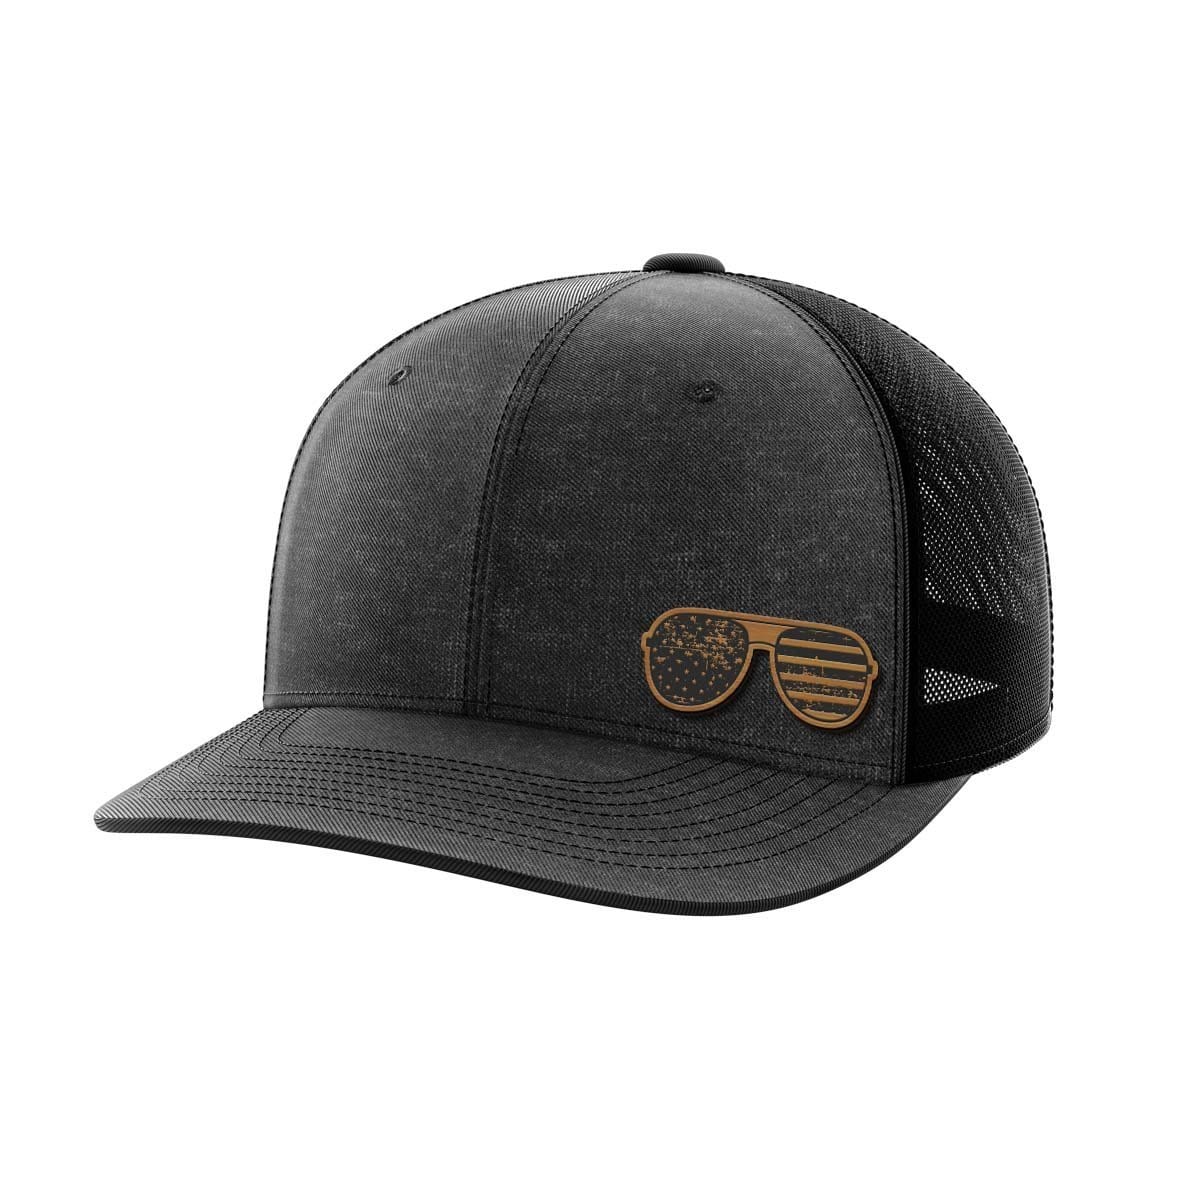 Thumbnail for Sunglasses Bamboo Patch Hat - Greater Half